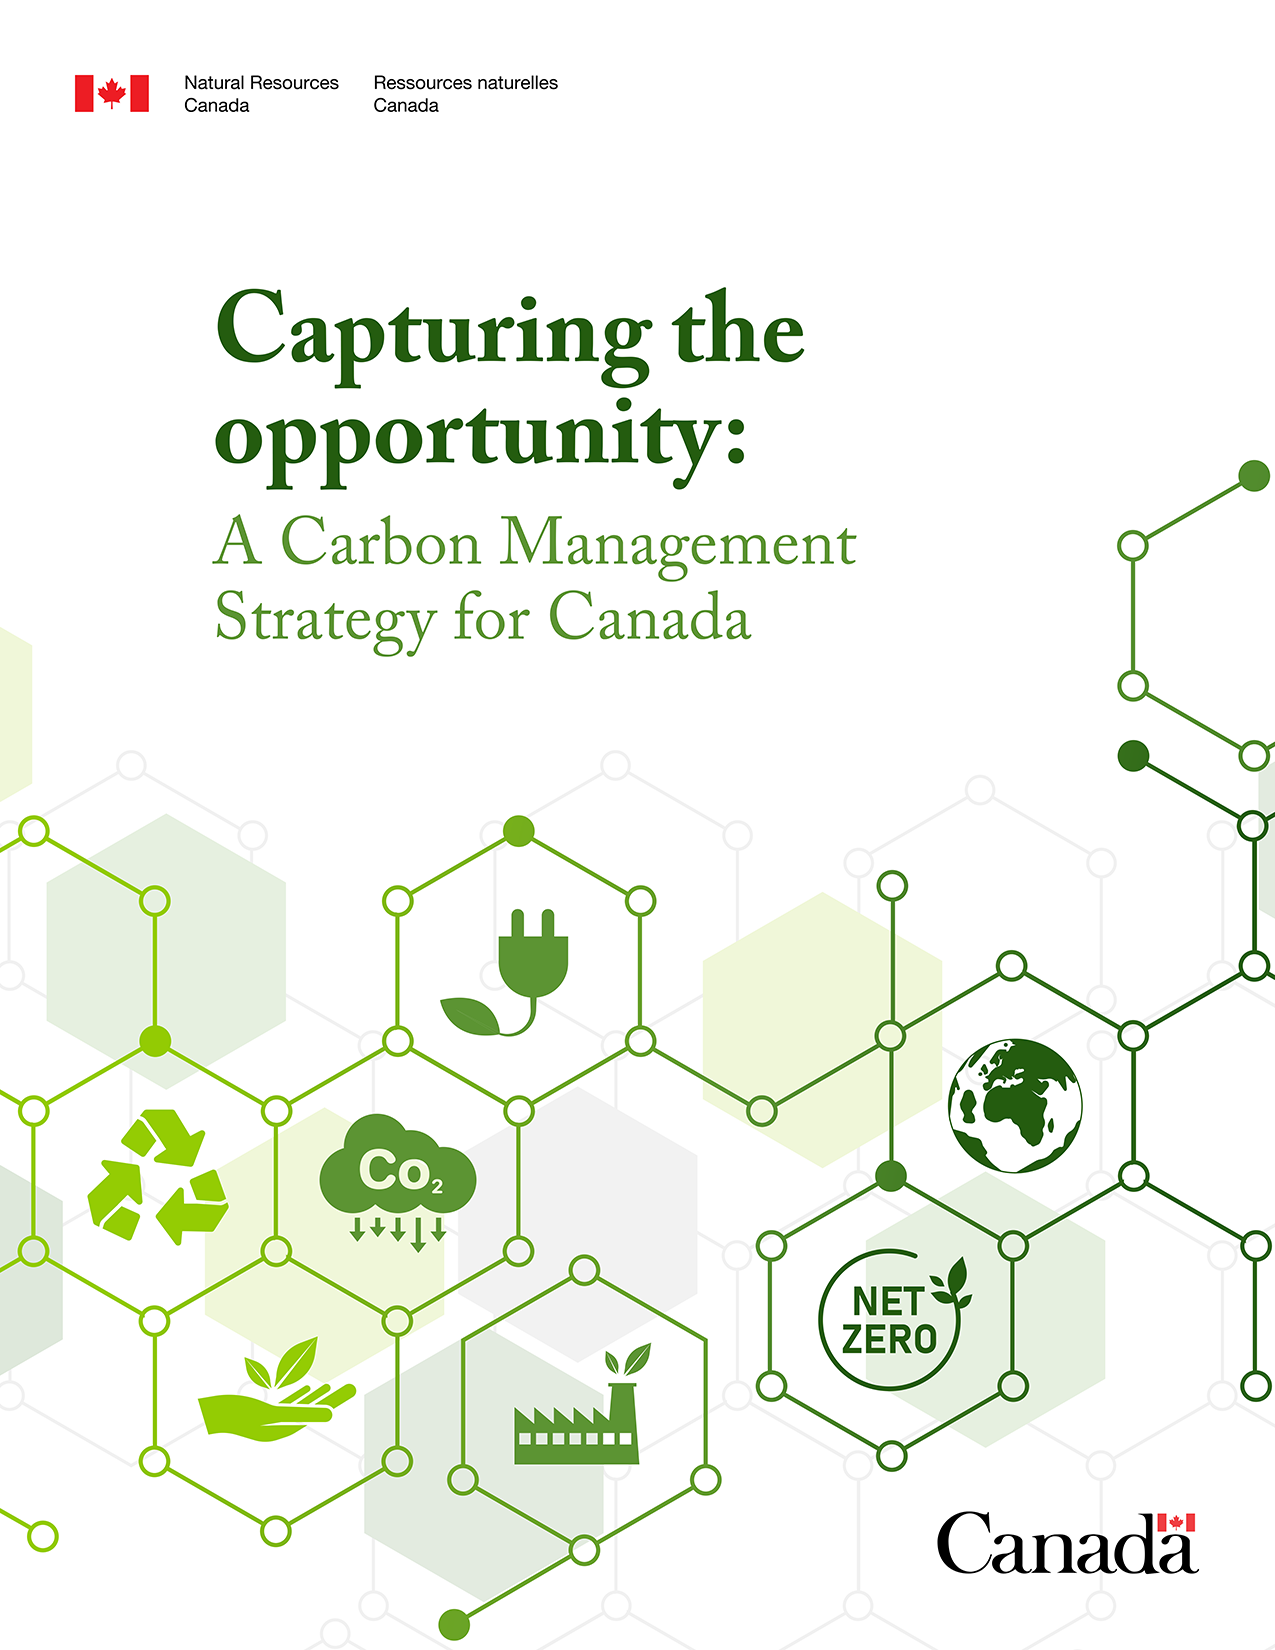 Canada's Carbon Management Strategy